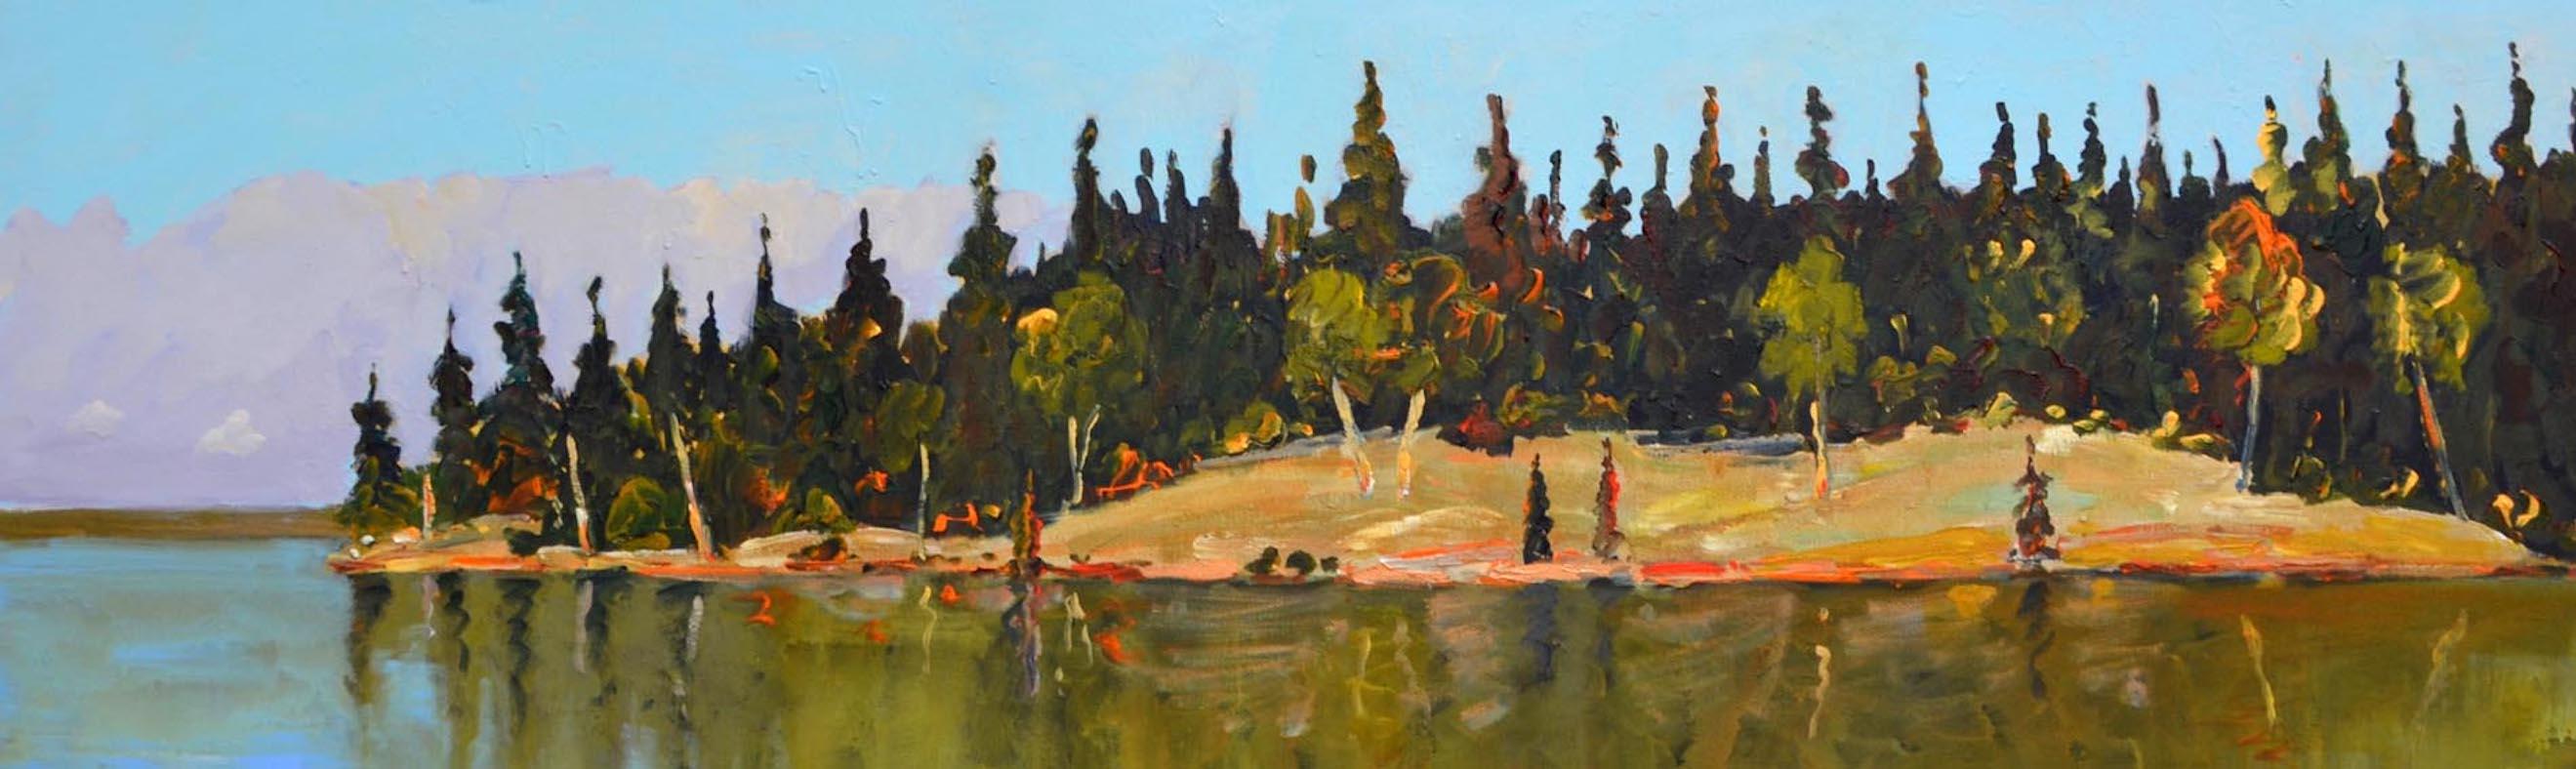 Gregory Hardy Landscape Painting - Edge of the Island, Late Summer, Contemporary, Expressionistic, Landscape